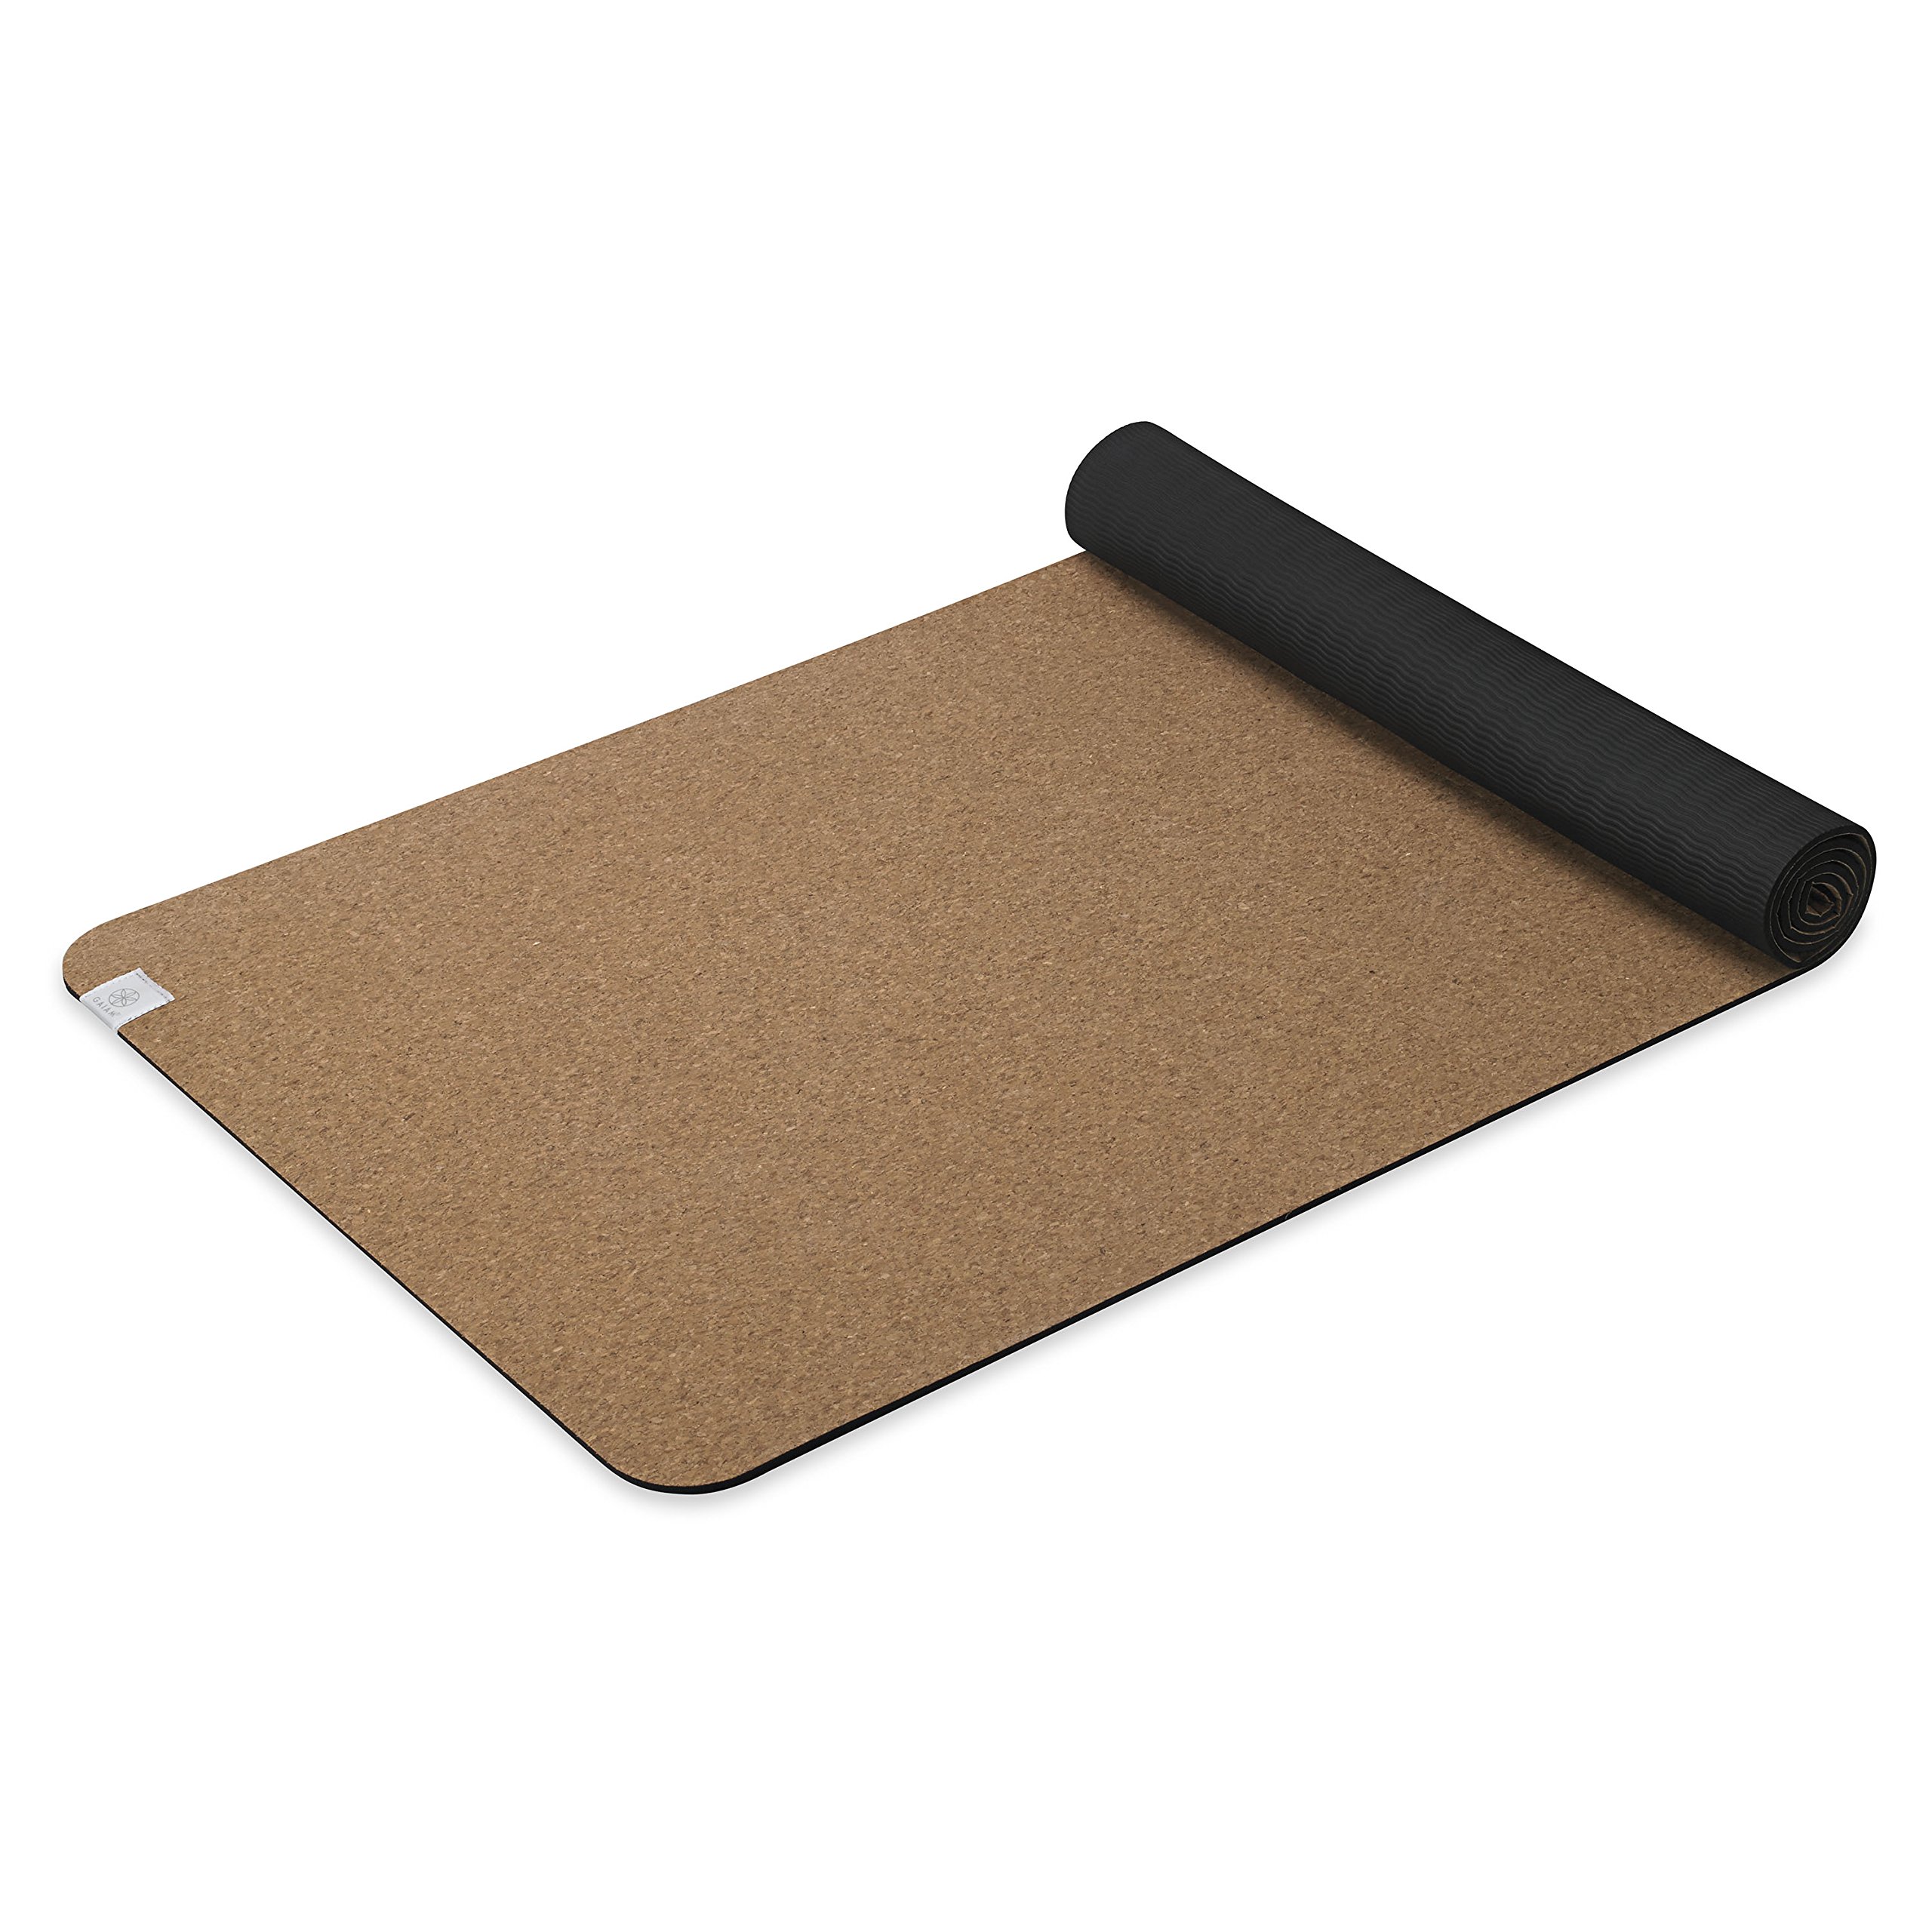 Gaiam Yoga Mat Cork - Great for Hot Yoga, Pilates (68-Inch x 24-Inch x 5mm Thick)